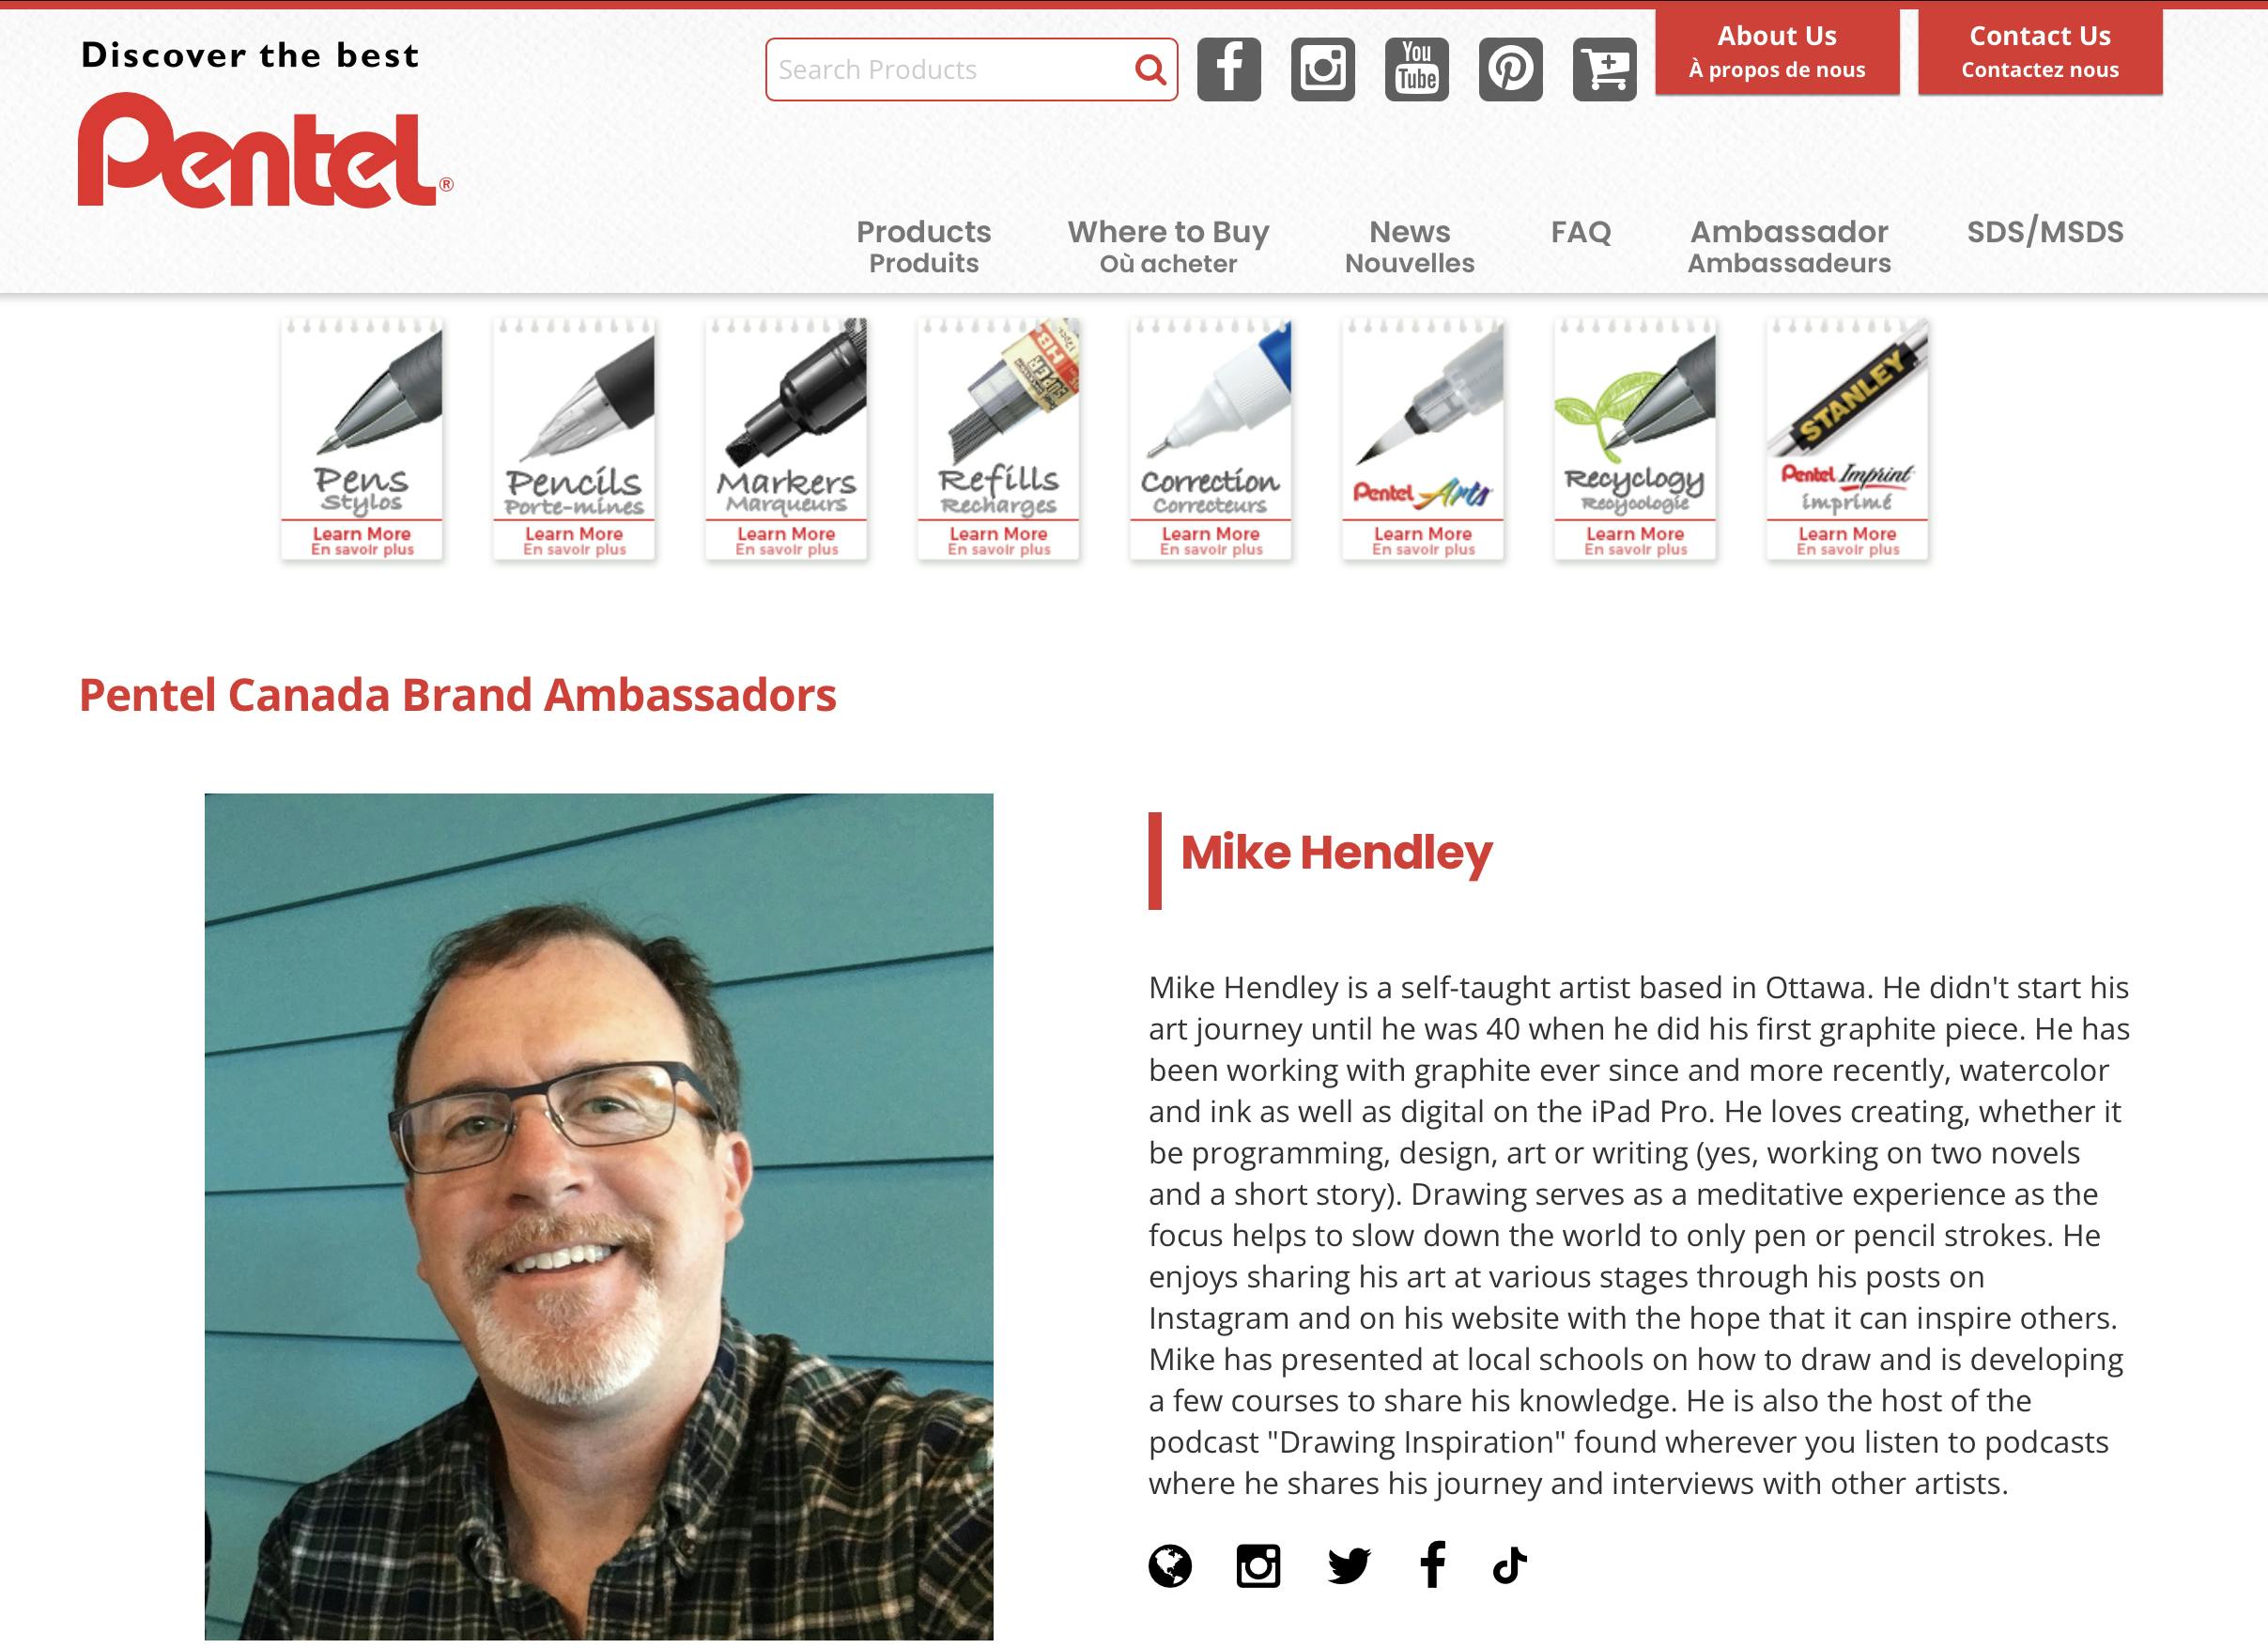 Mike’s Ambassador page on Pentel Canada